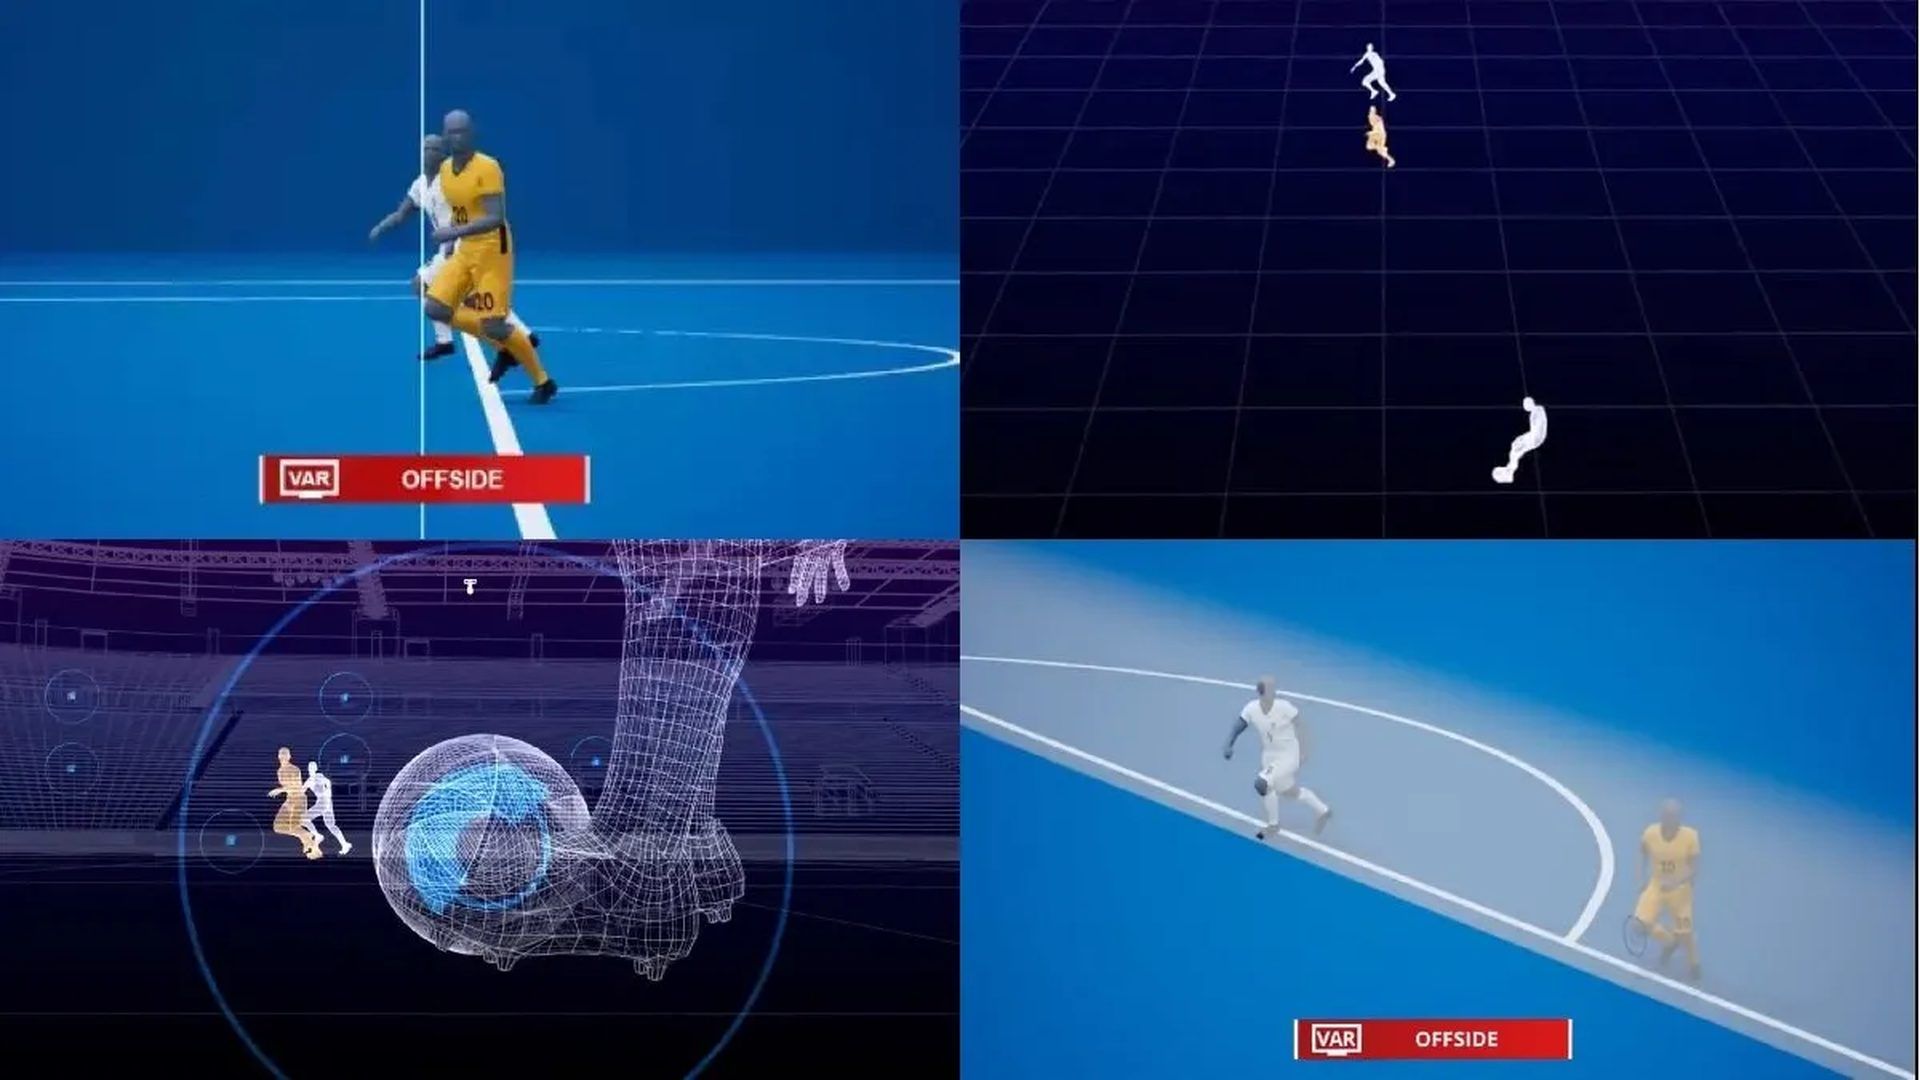 Can semi-automated offside technology turn the 2022 World Cup referees from wrong decisions more quickly?